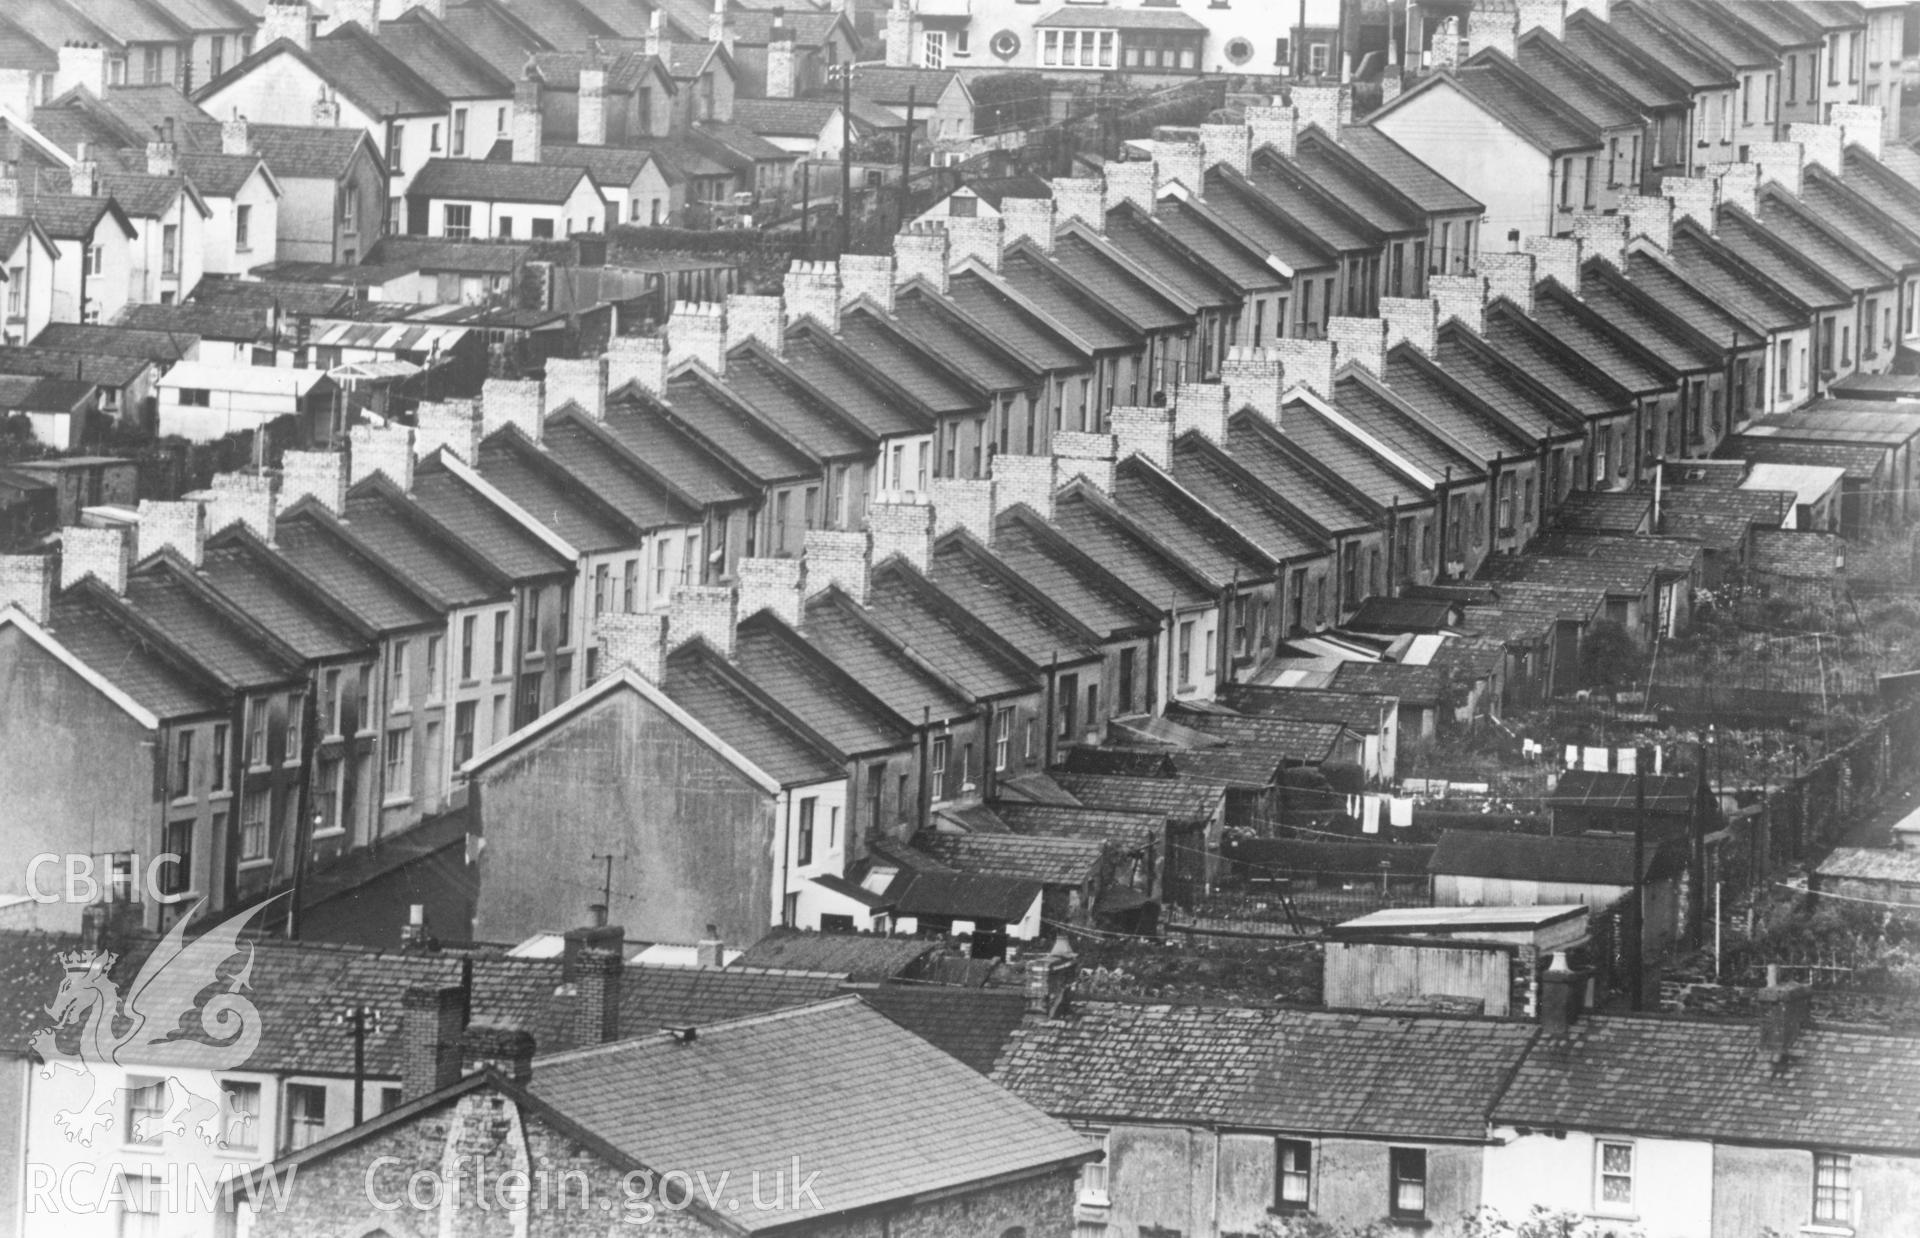 1 b/w print showing view of terraced housing on a hillside in Merthyr Tydfil; collated by the former Central Office of Information.